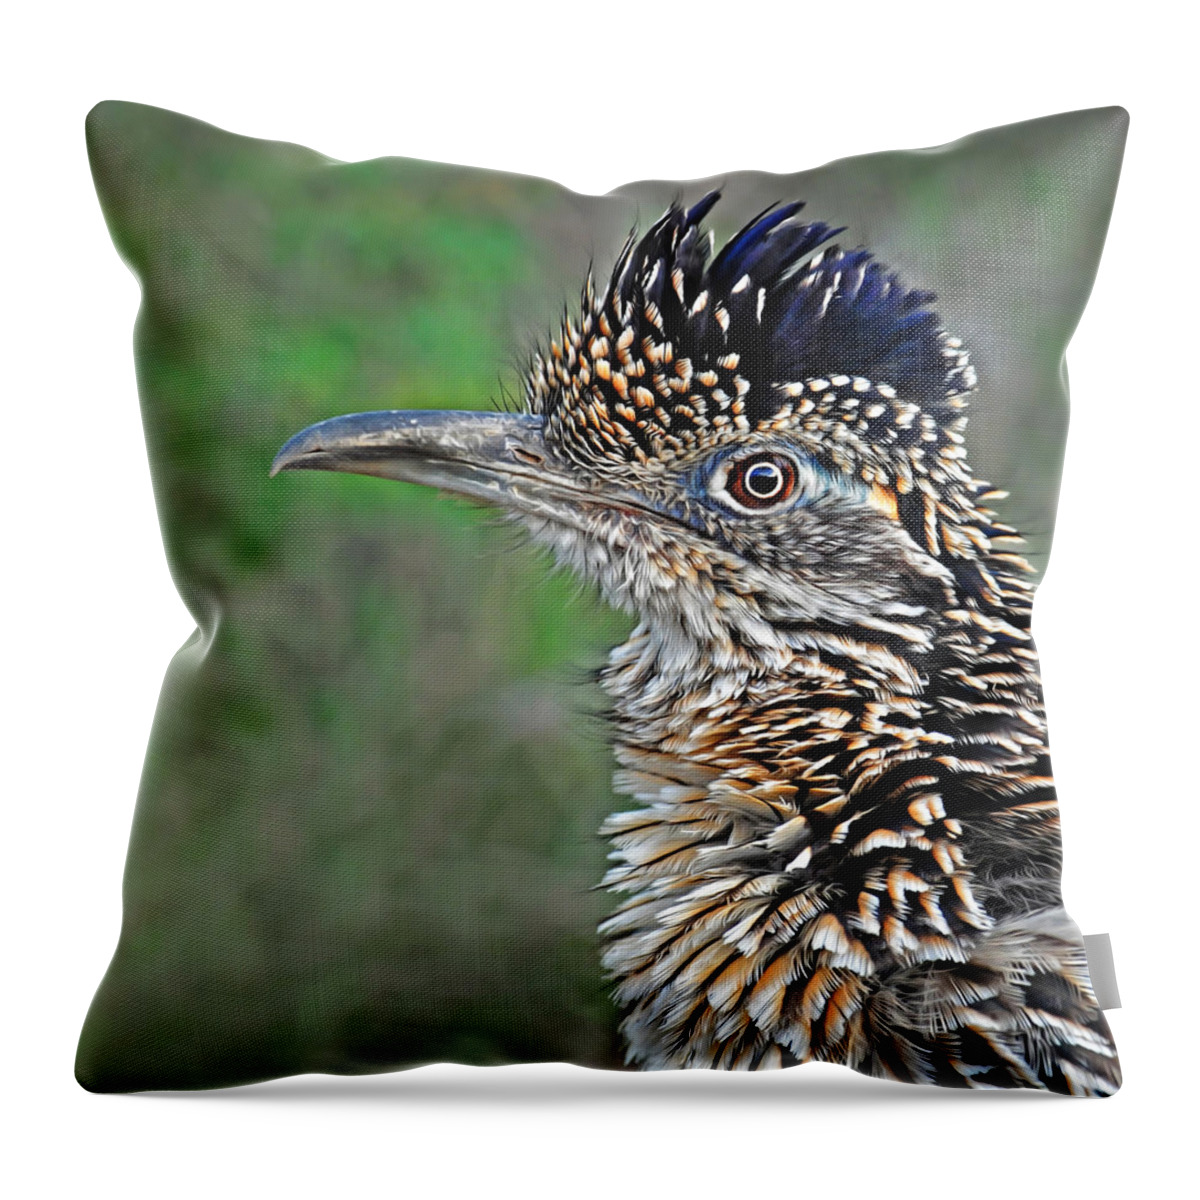 Roadrunner Throw Pillow featuring the photograph Roadrunner Portrait by Dave Mills